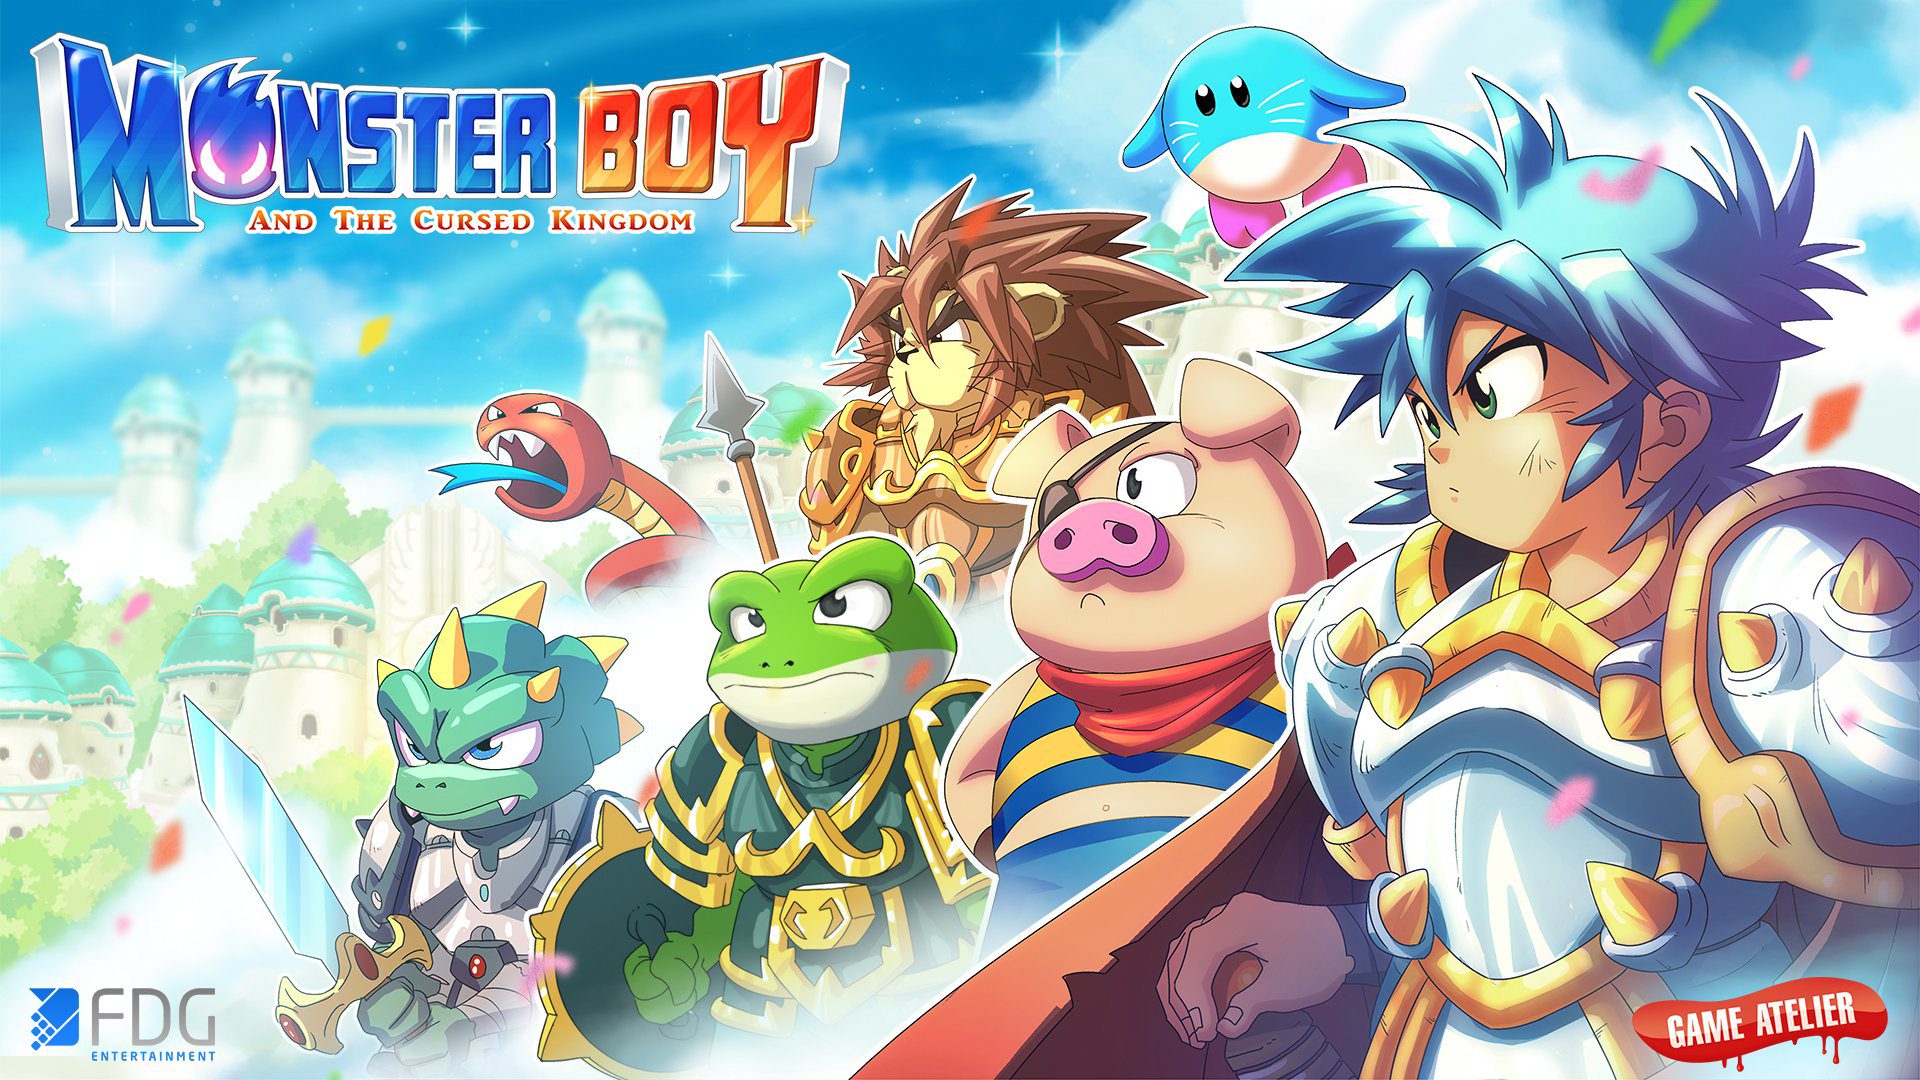 Monster Boy and the Cursed Kingdom for Switch coming to E3